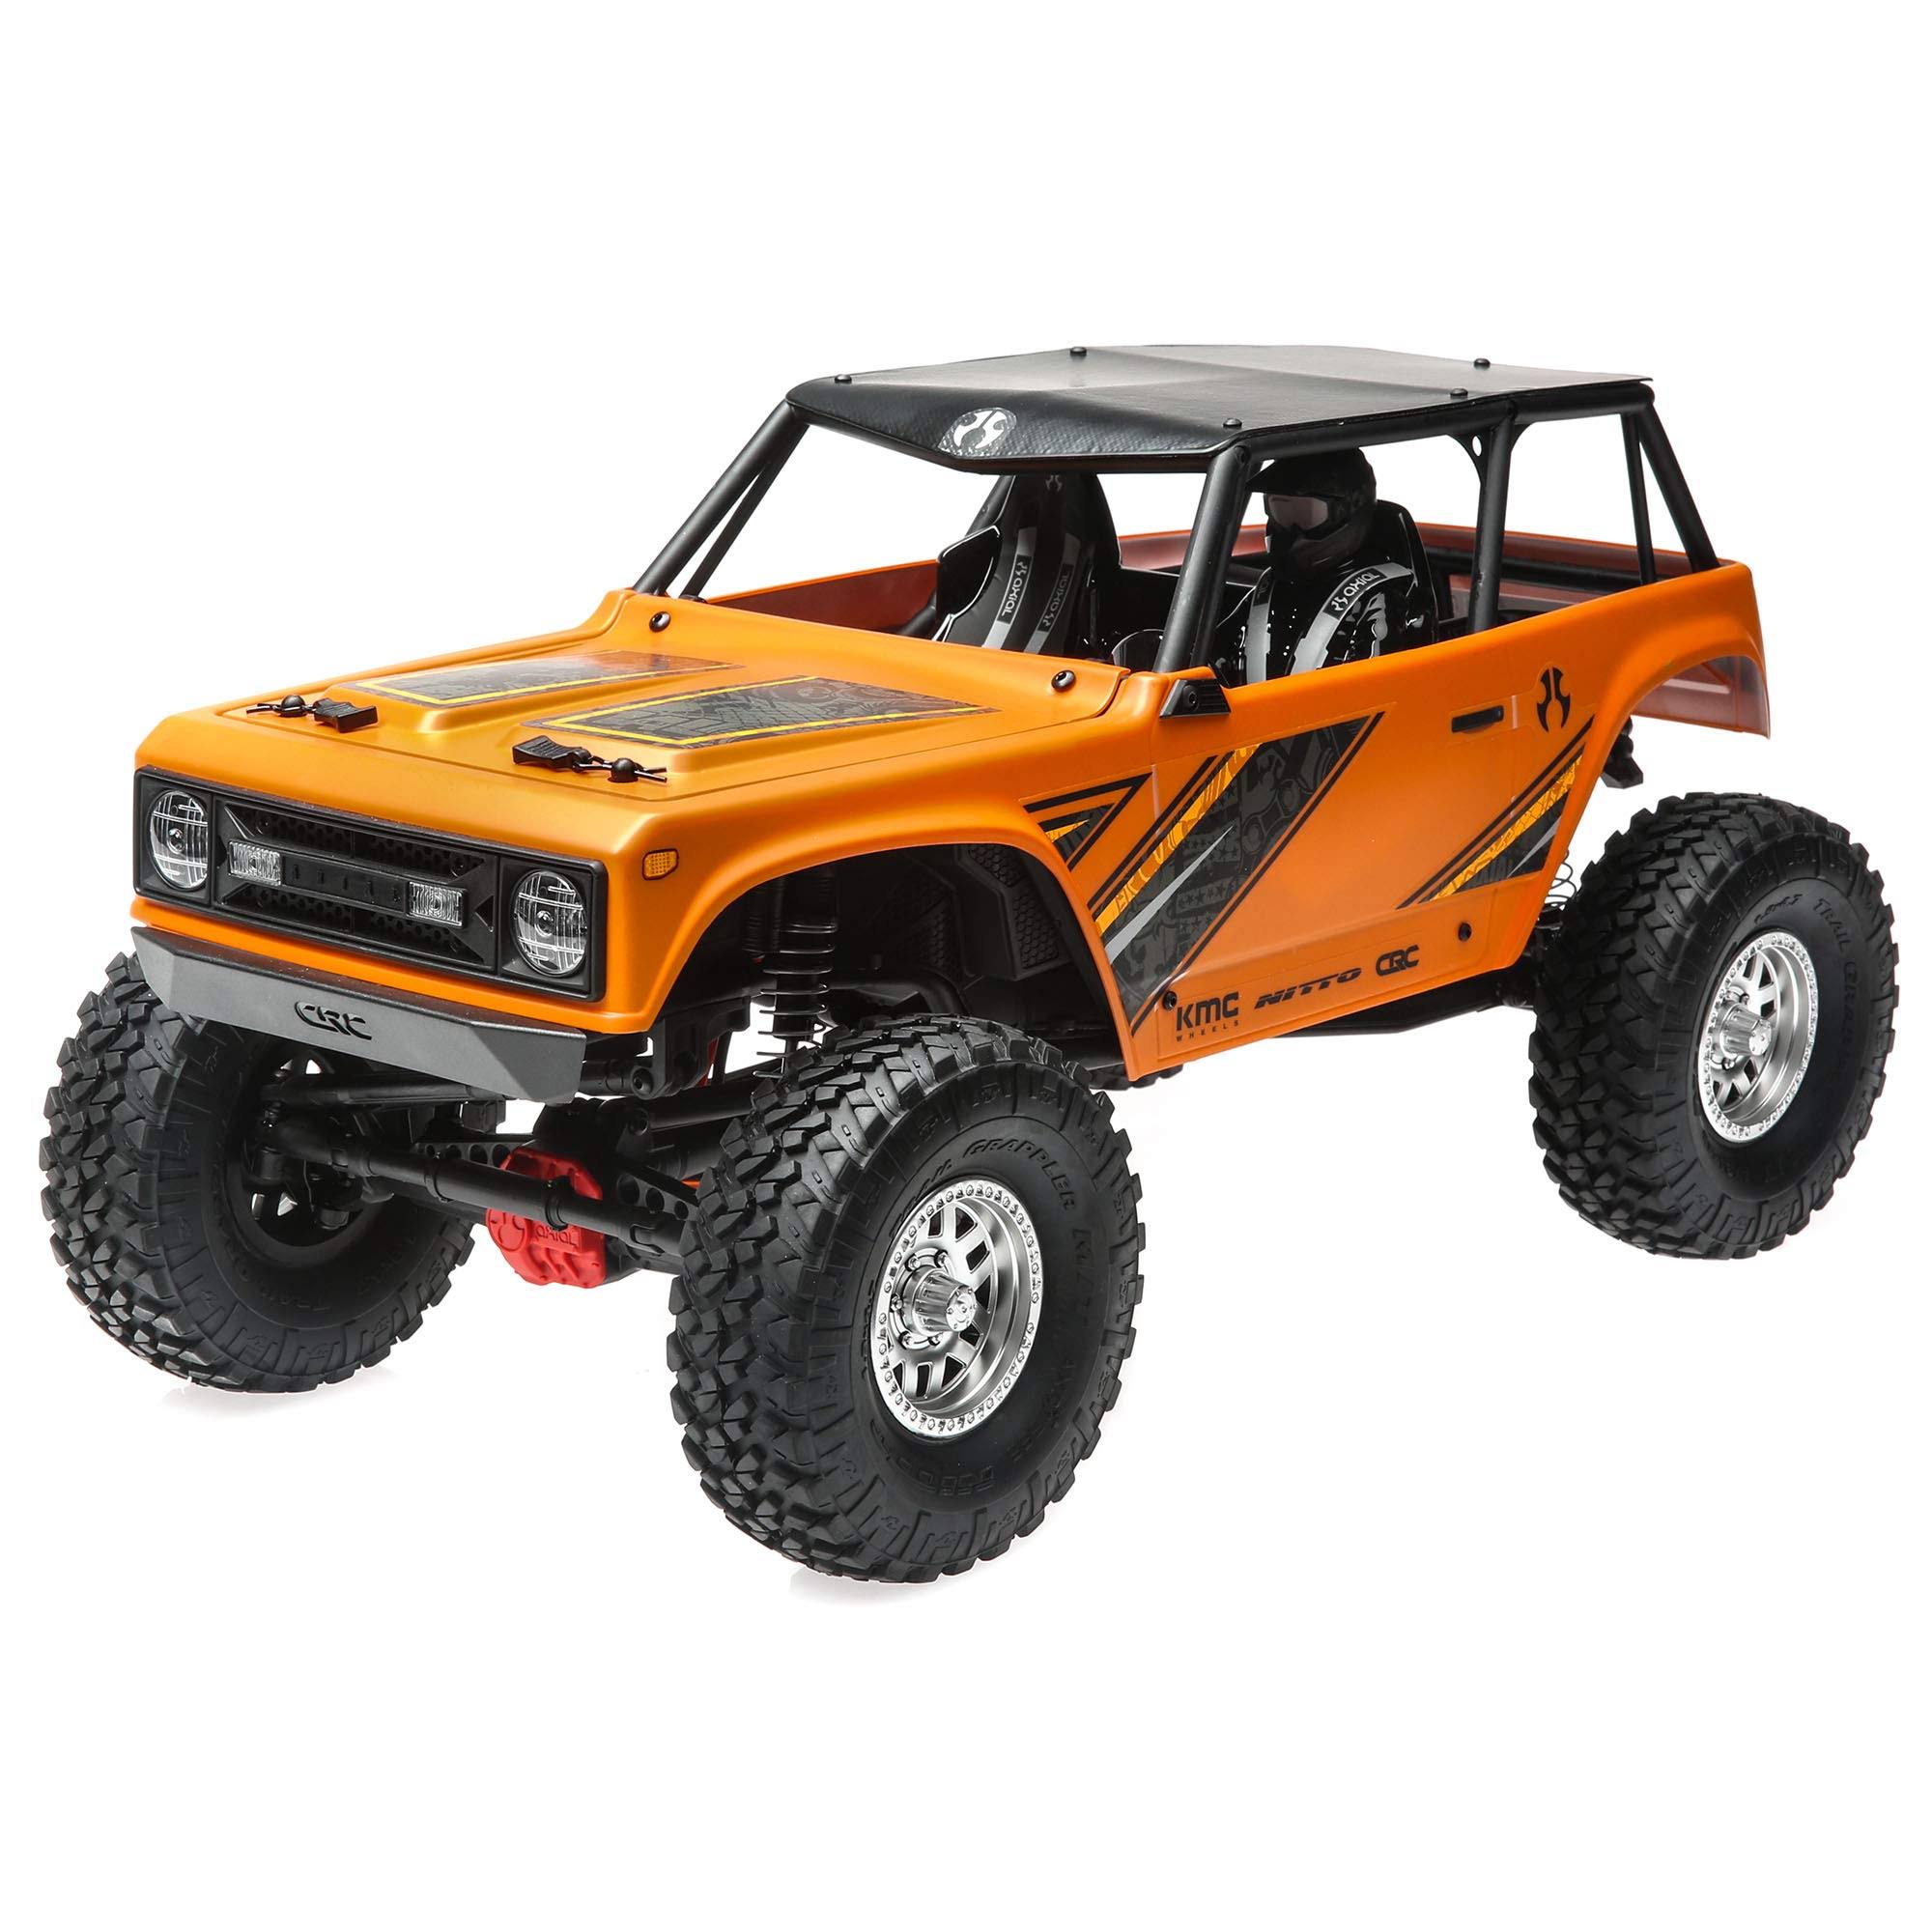 Axial Wraith 1.9 4wd Brushed RTR Stx2 RC Truck - Orange, 1:10 Scale